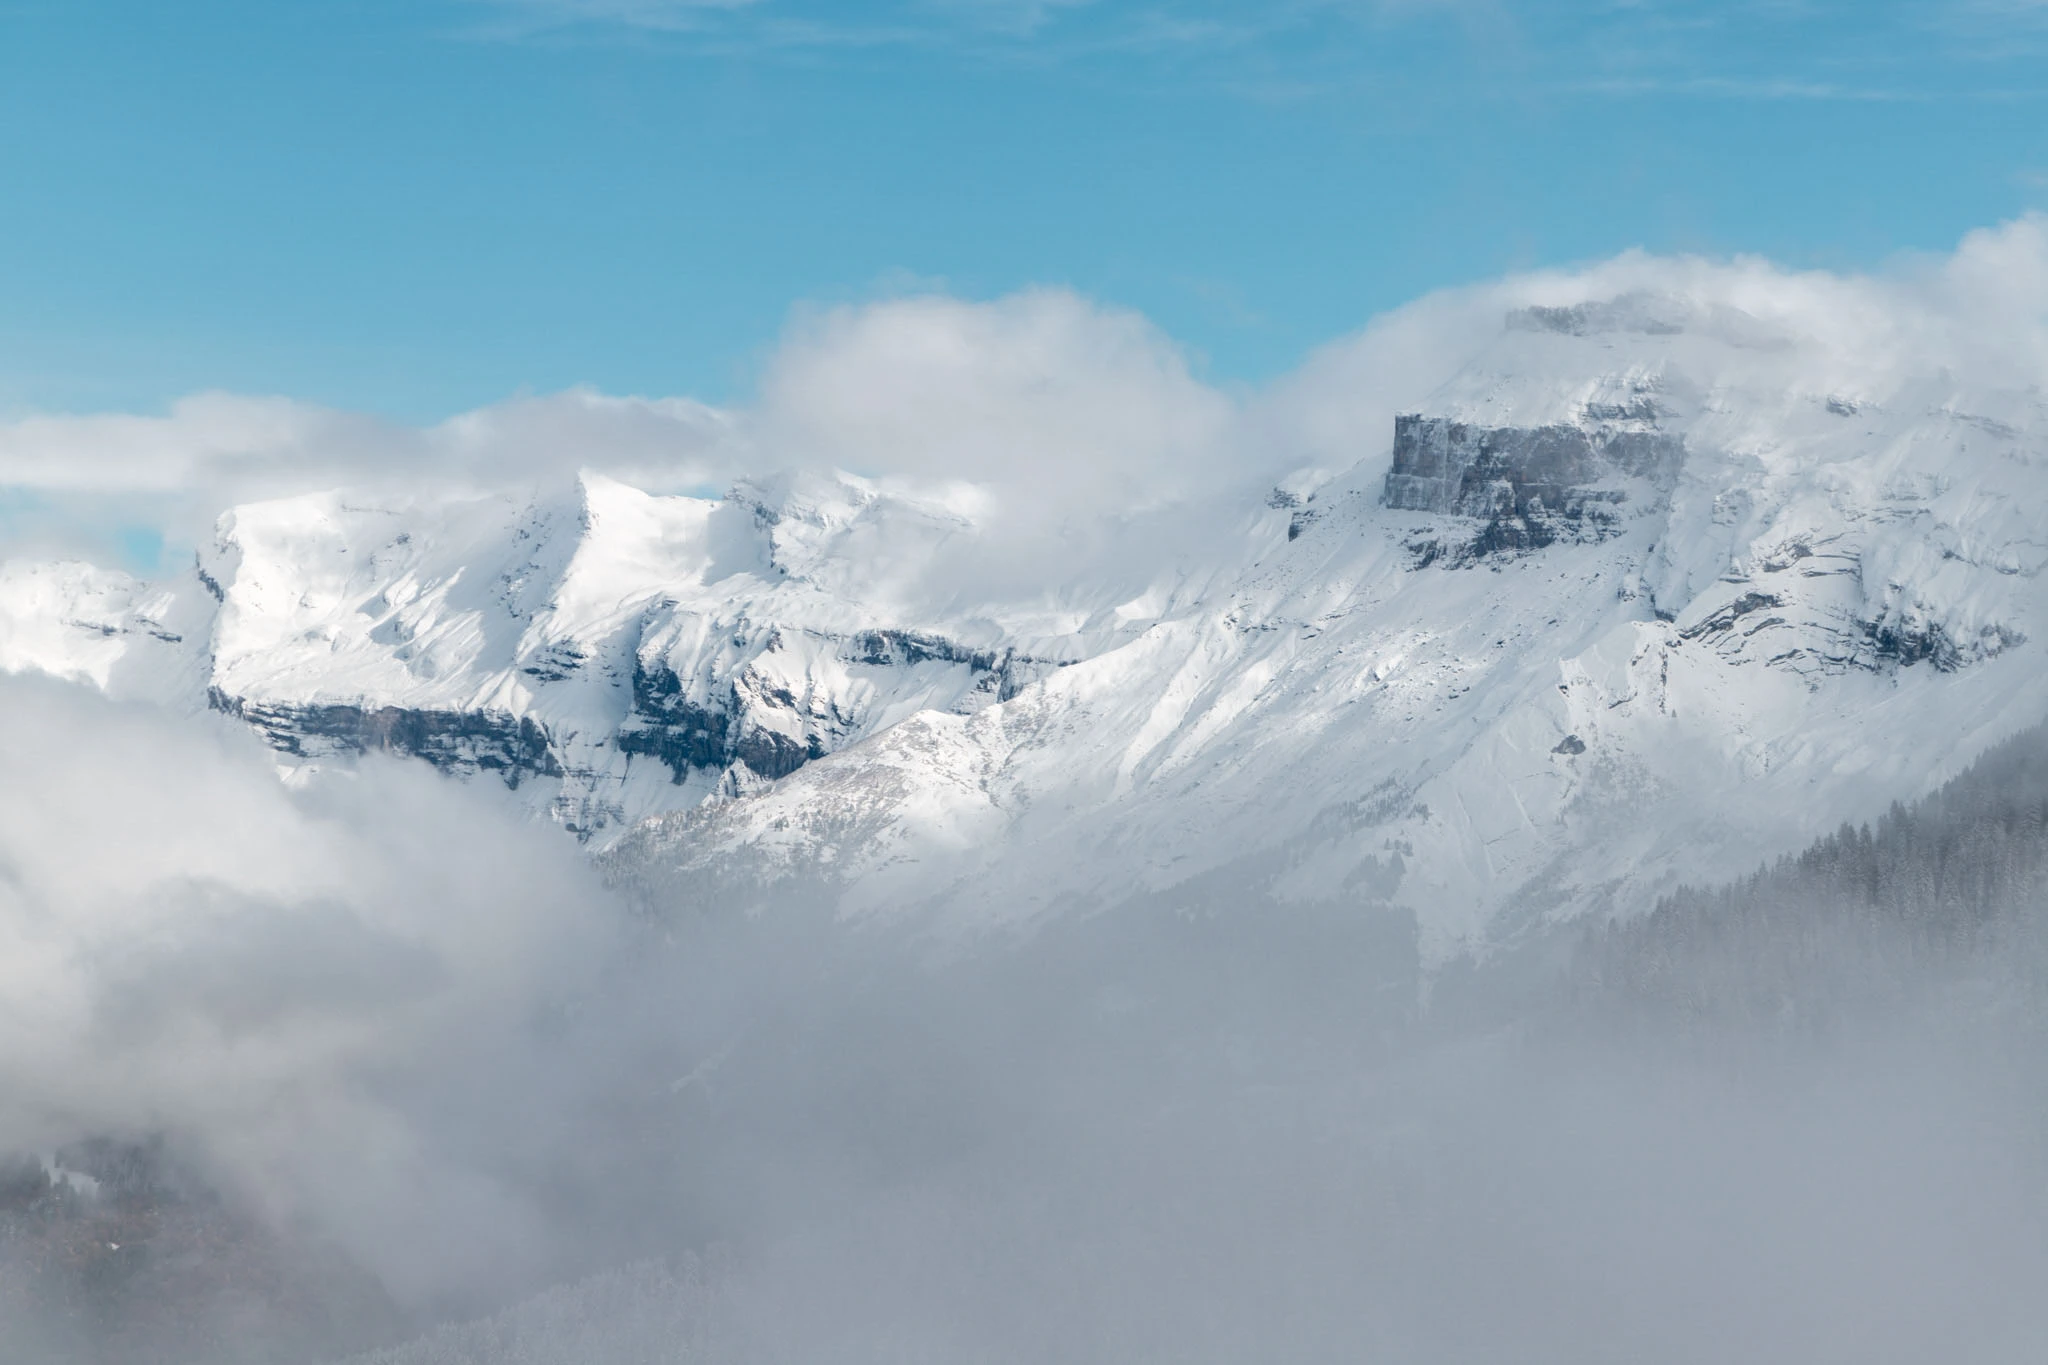 cloud covers the high mountains of Samoens